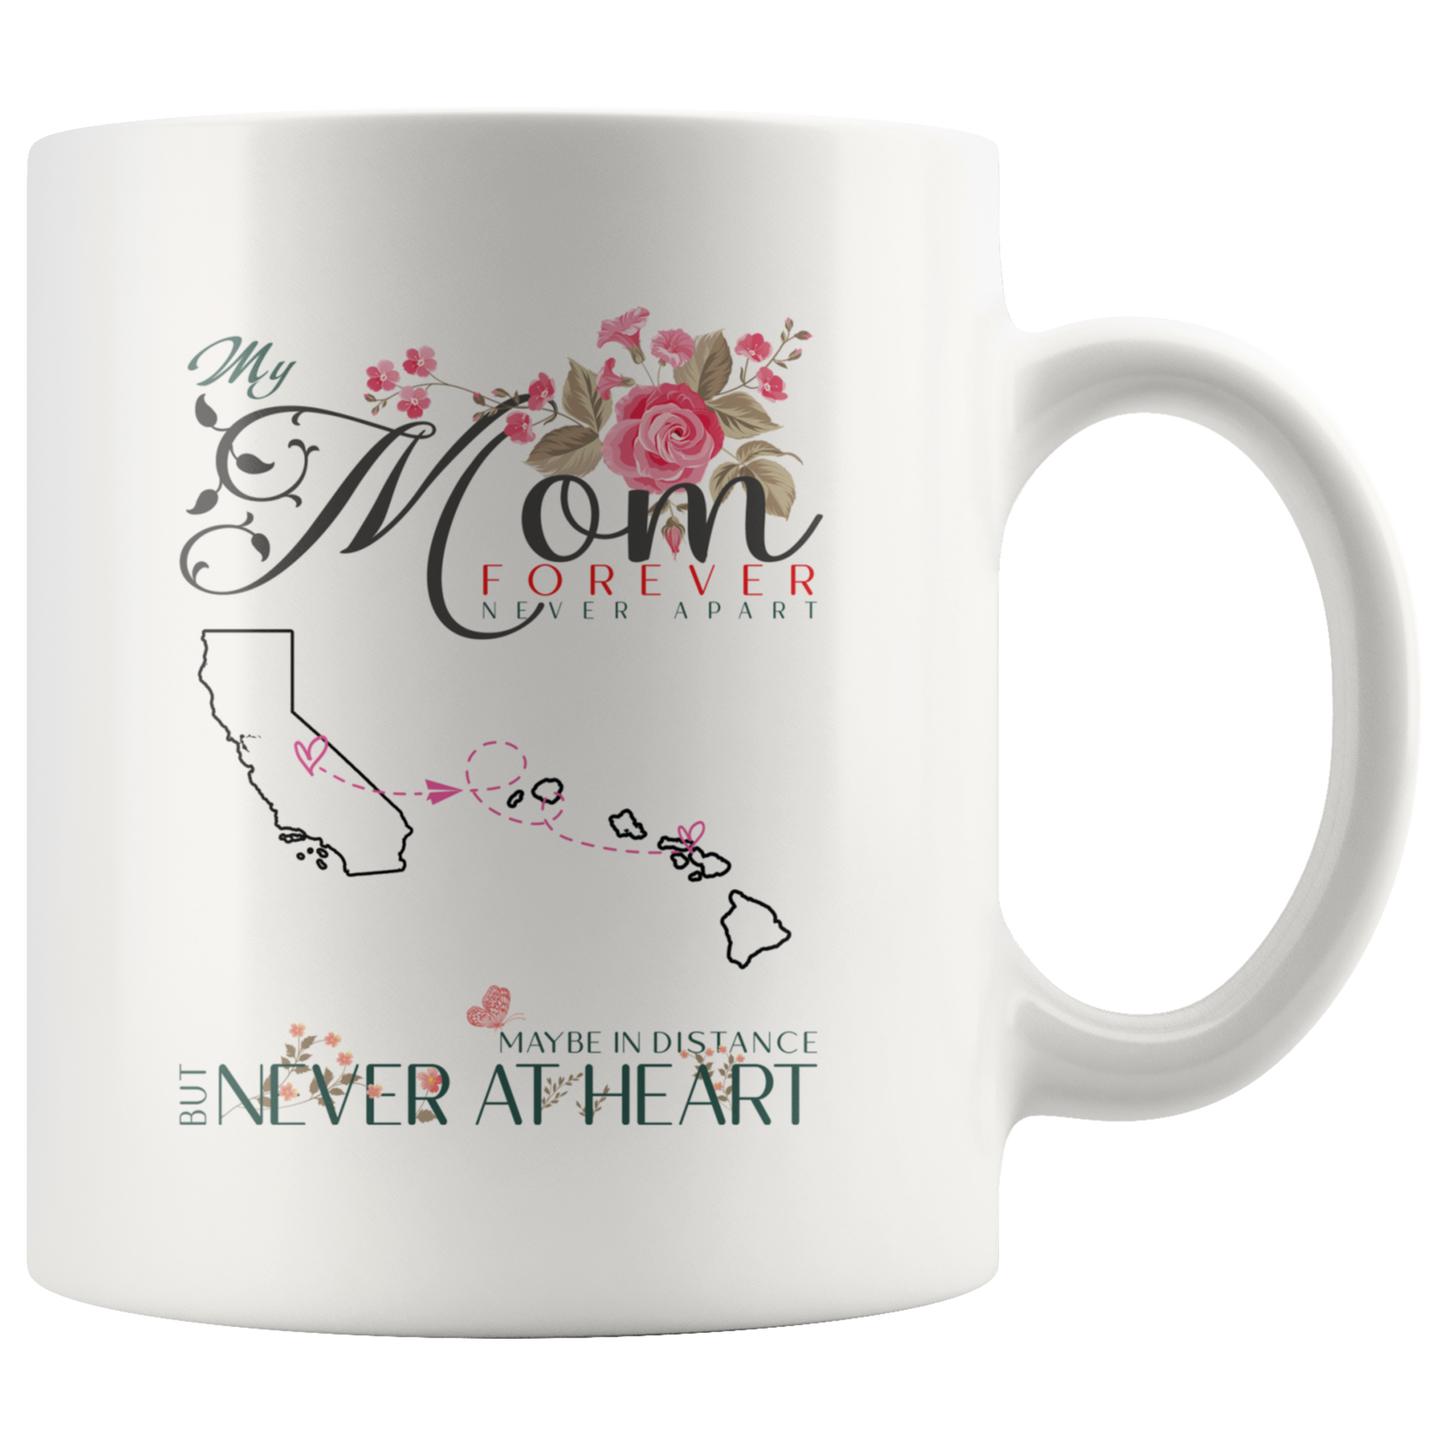 M-20321571-sp-23620 - [ California | Hawaii ]Personalized Mothers Day Coffee Mug - My Mom Forever Never A